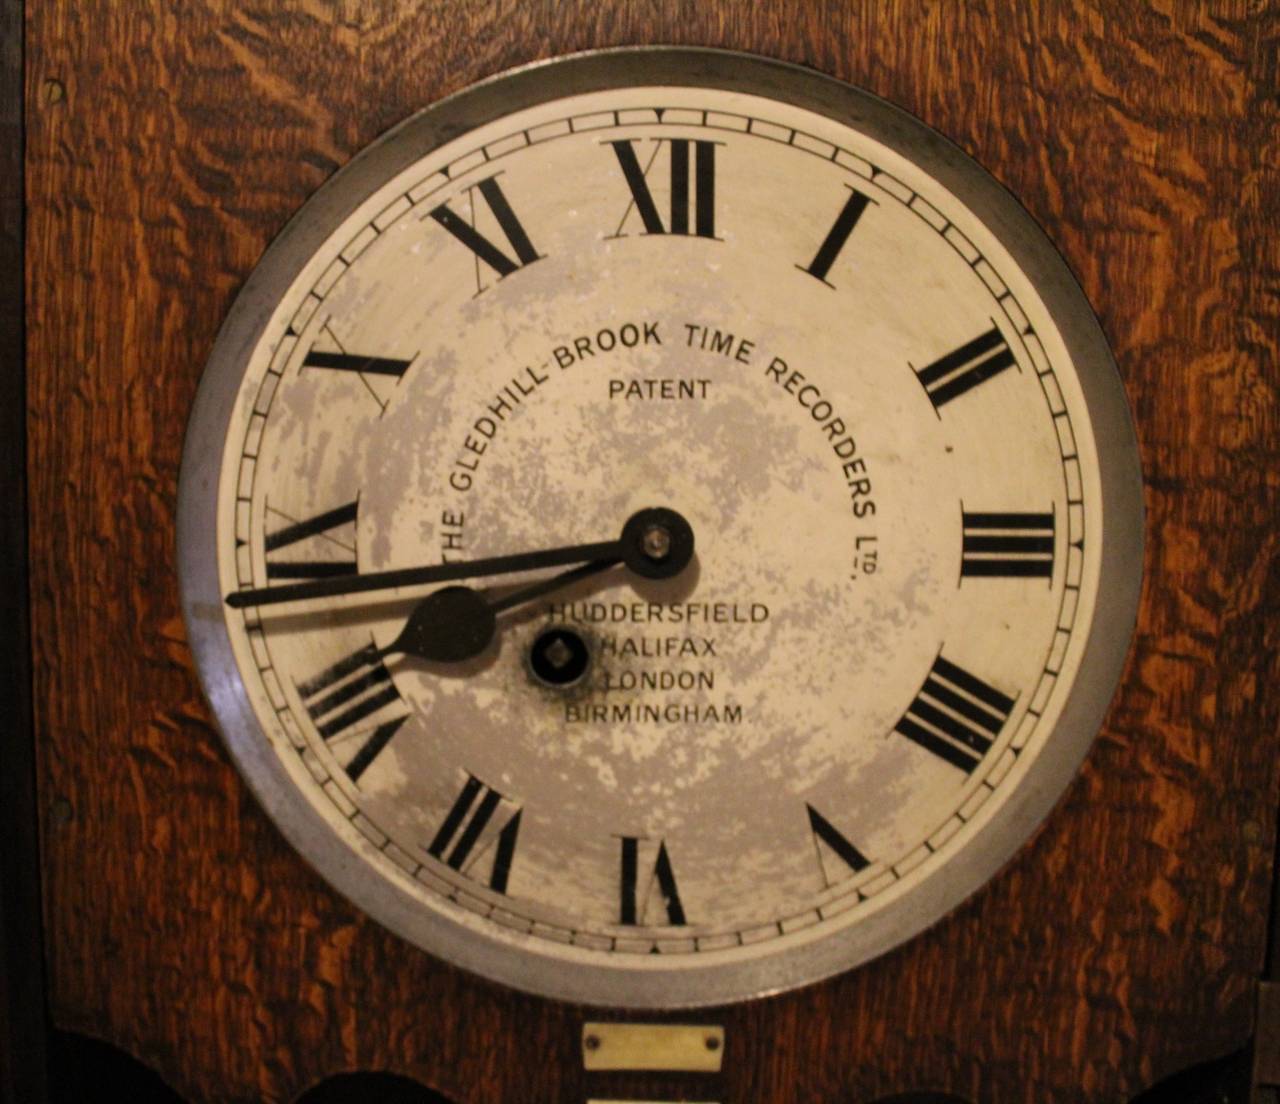 English time recorder clock, Machine Age.

Solid oak English time recorder clock by Gledhill Brook Time Recorders Ltd. This clock has a robust fusee movement and is coined as the 